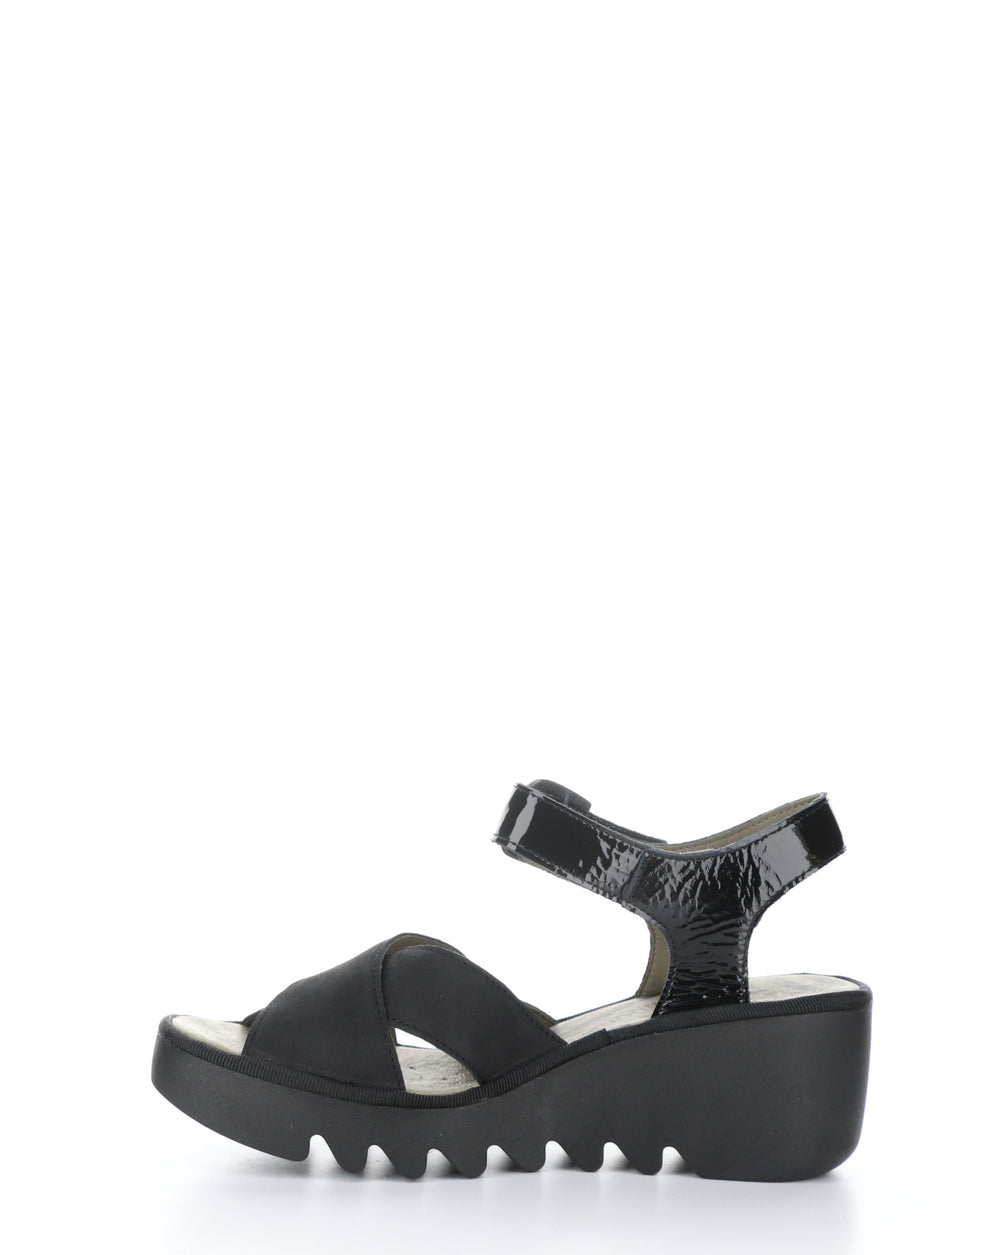 BACE411FLY 000 BLACK Round toe Sandals